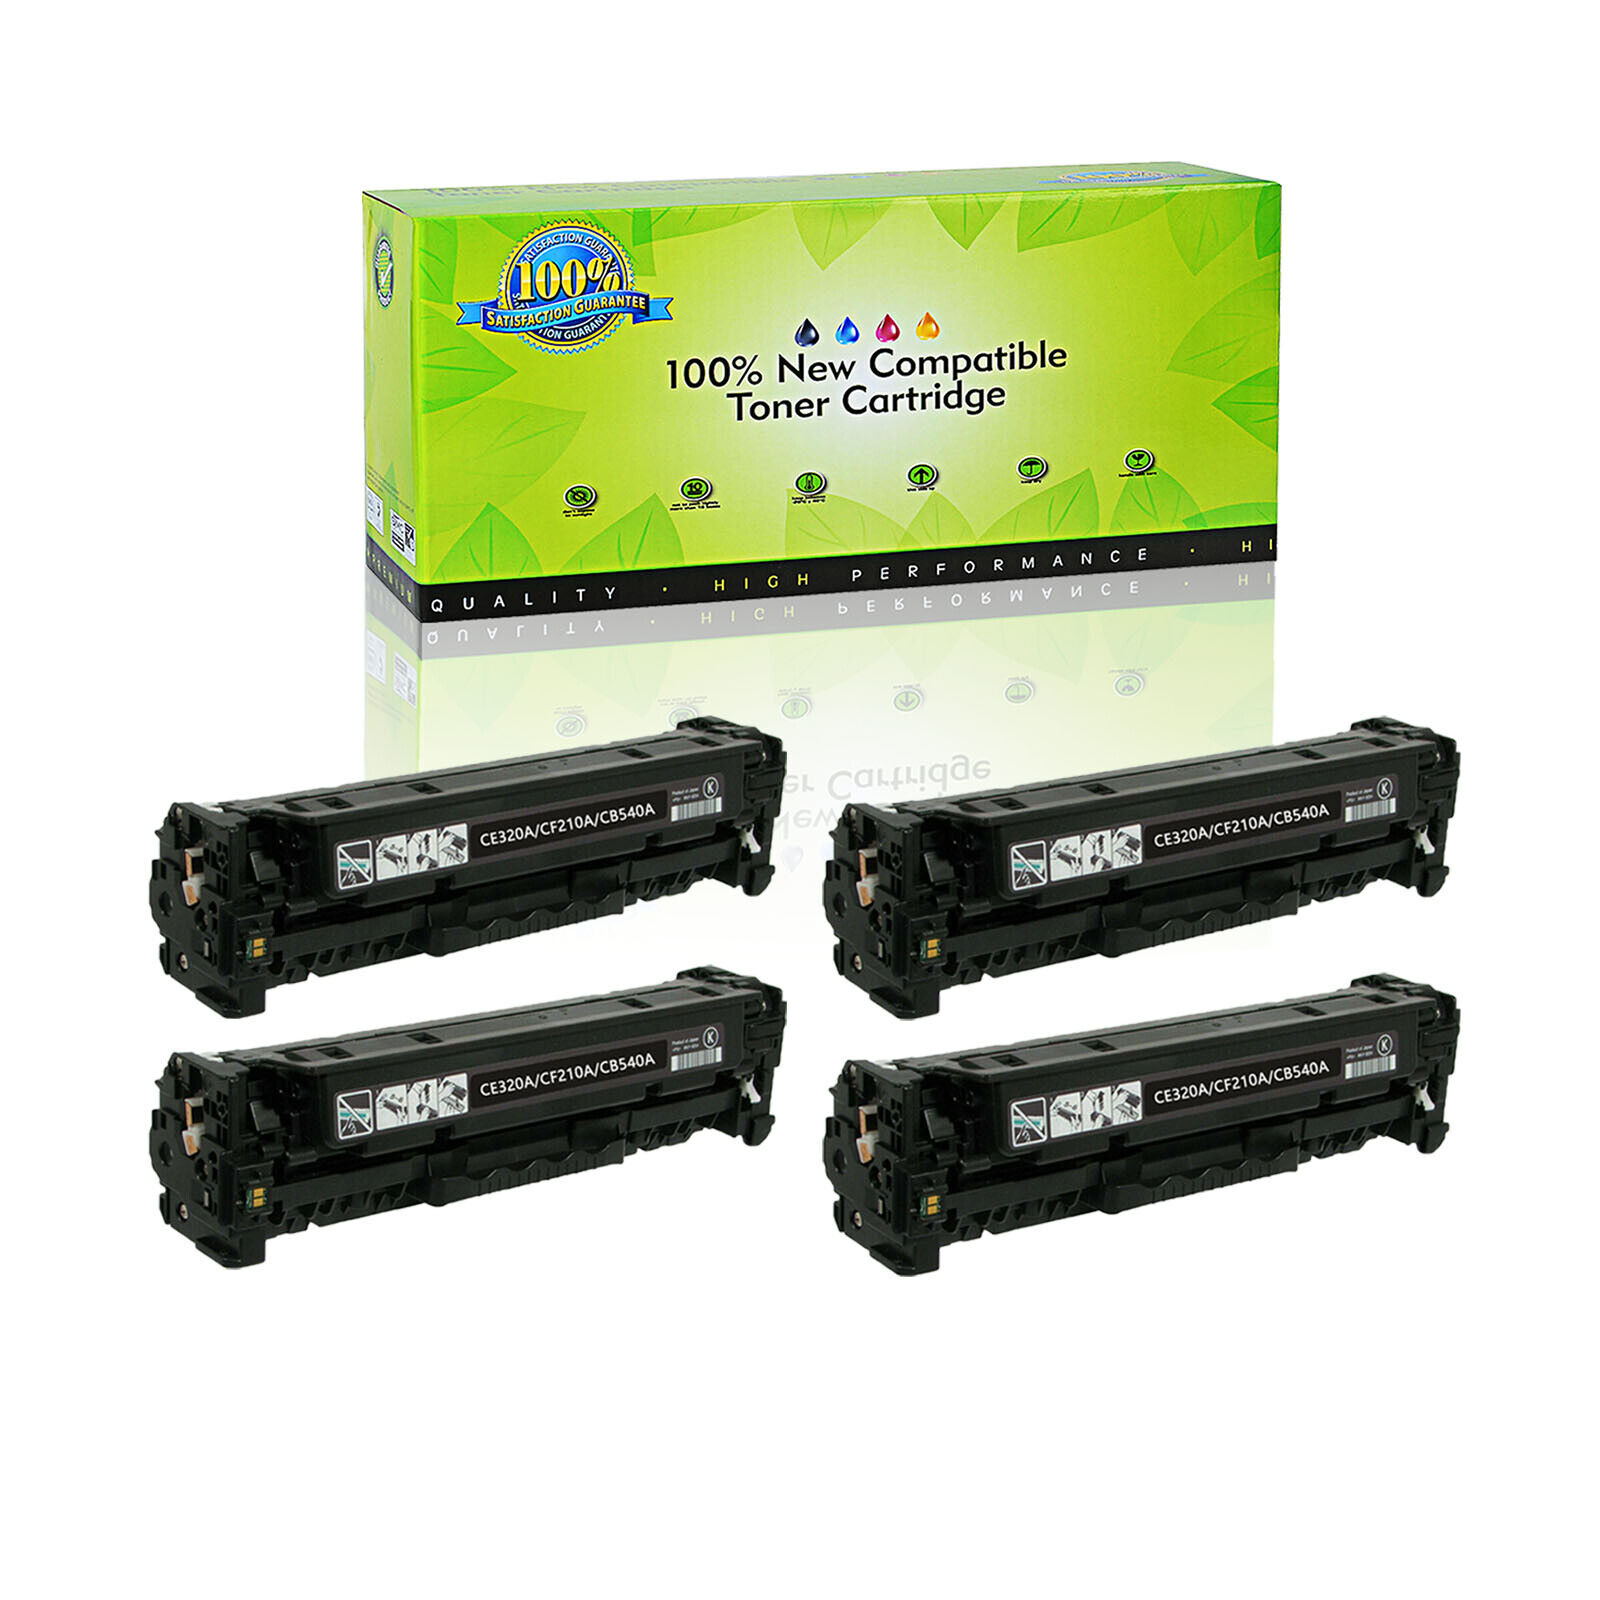 4 Pack 131A CF210A Black Toner Cartridge For HP LaserJet 200 M251nw M276nw